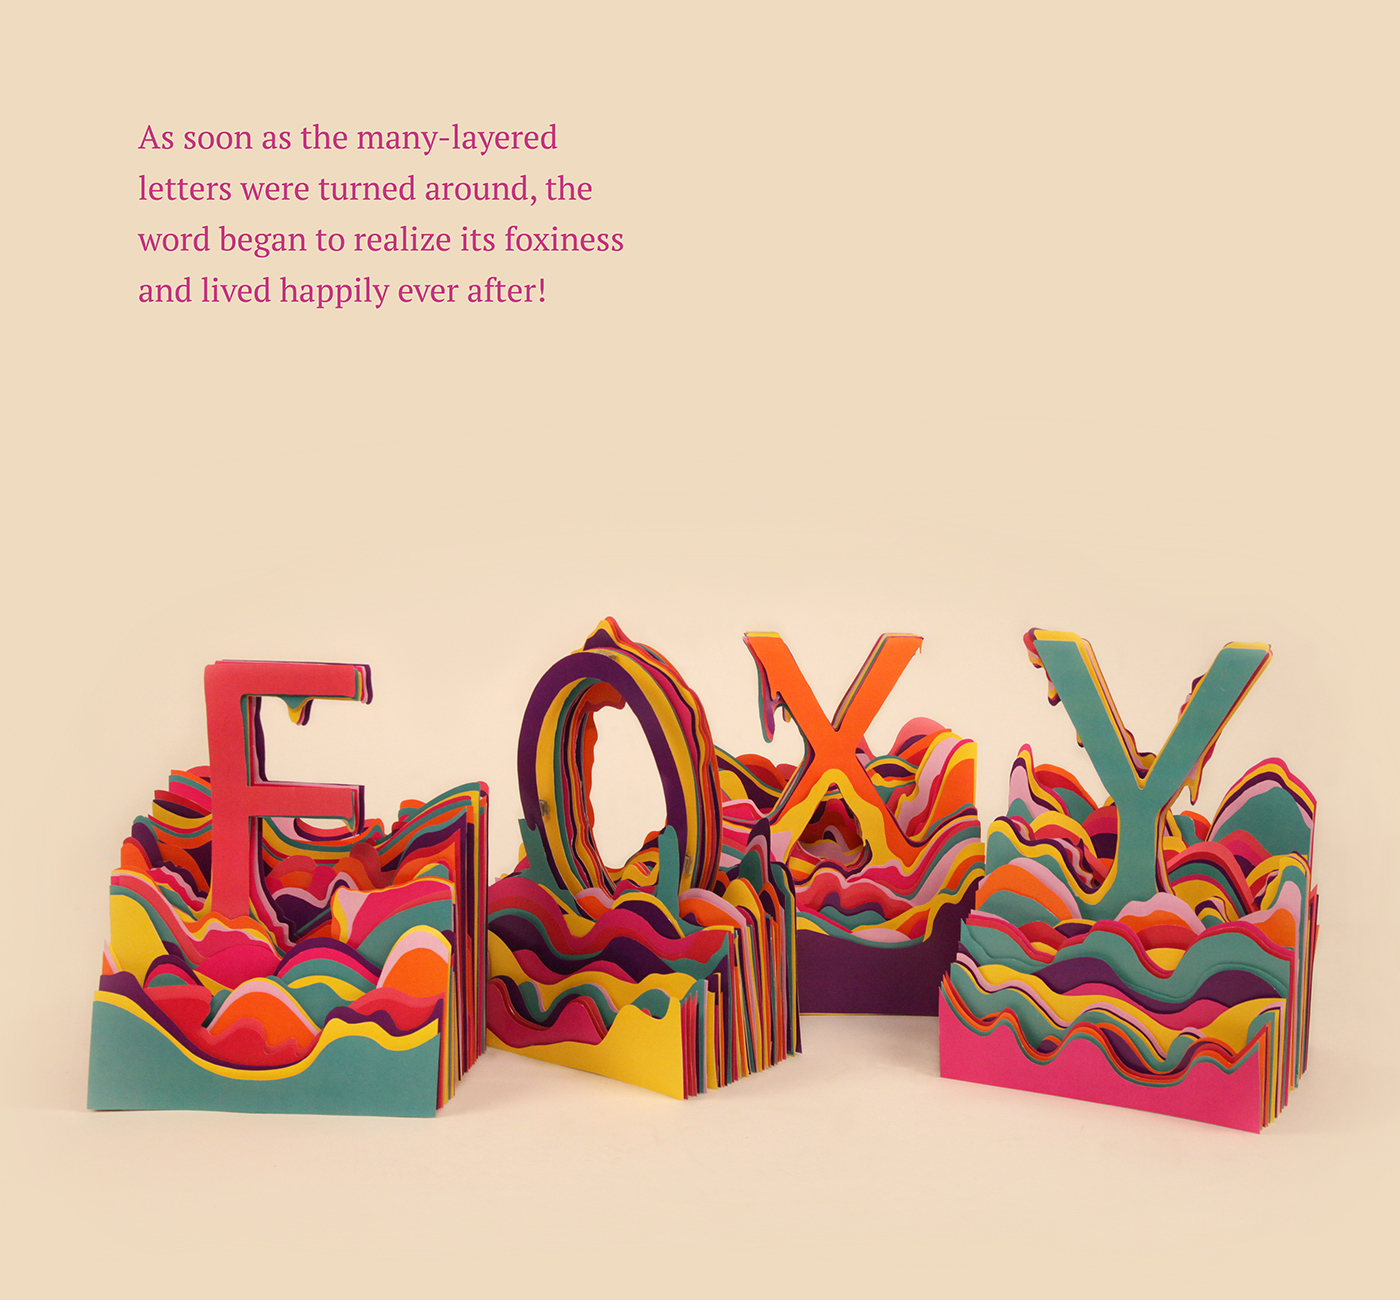 Foxy layers cardboard paper waves physical papercraft